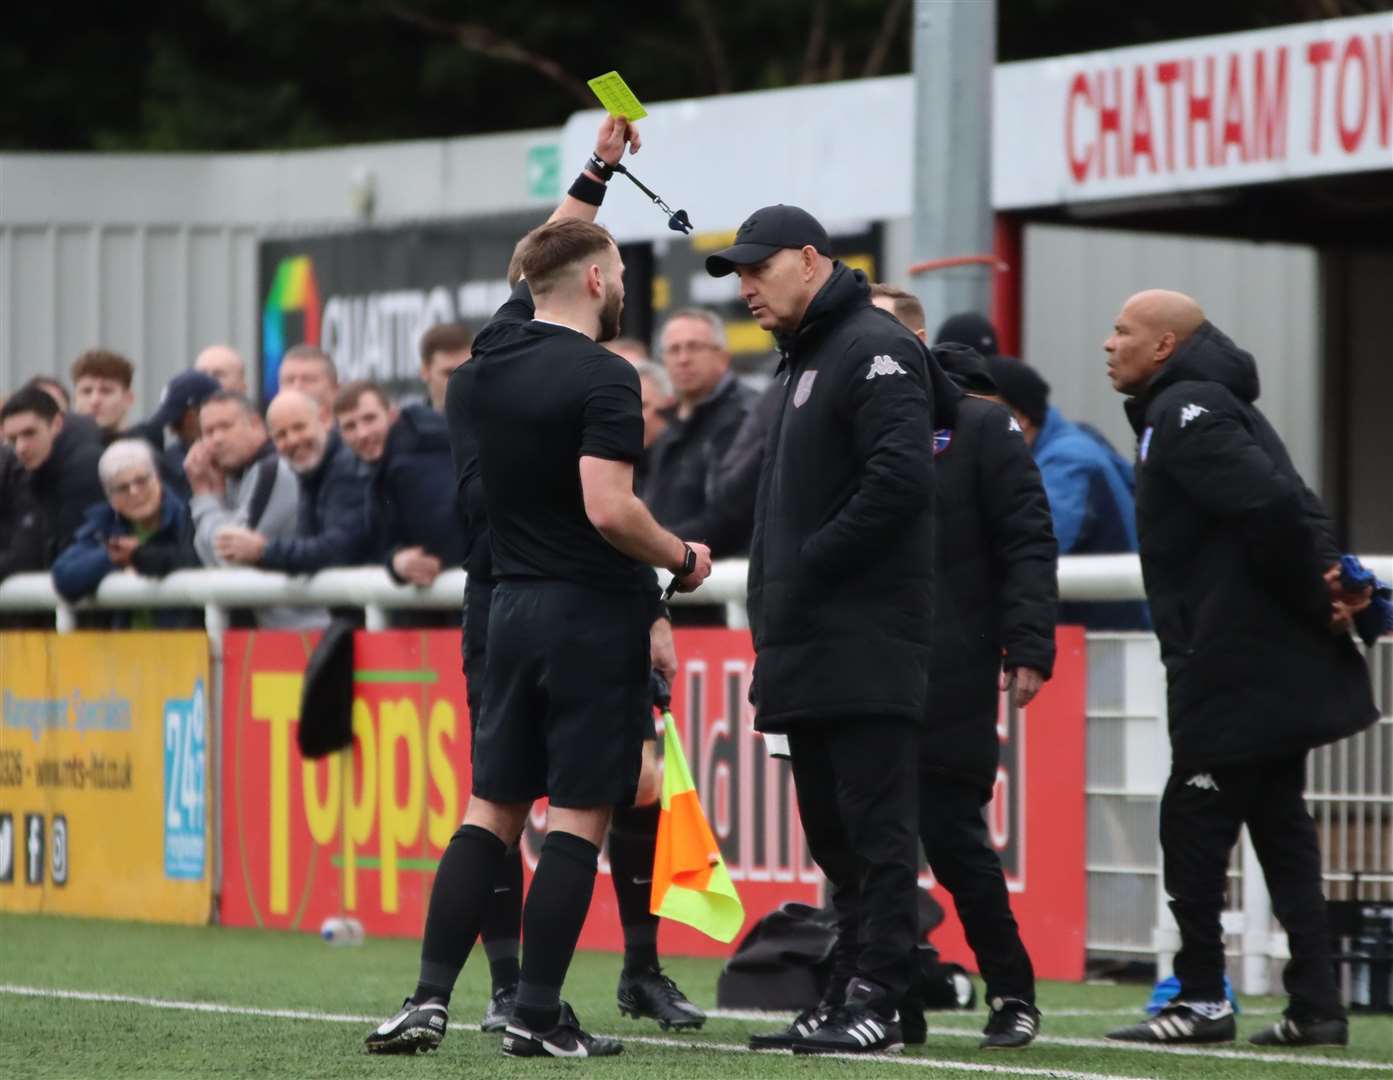 Margate manager Mark Stimson is cautioned by referee Joshua Langley-Fineing in the first half. Picture: Max English (@max_ePhotos)